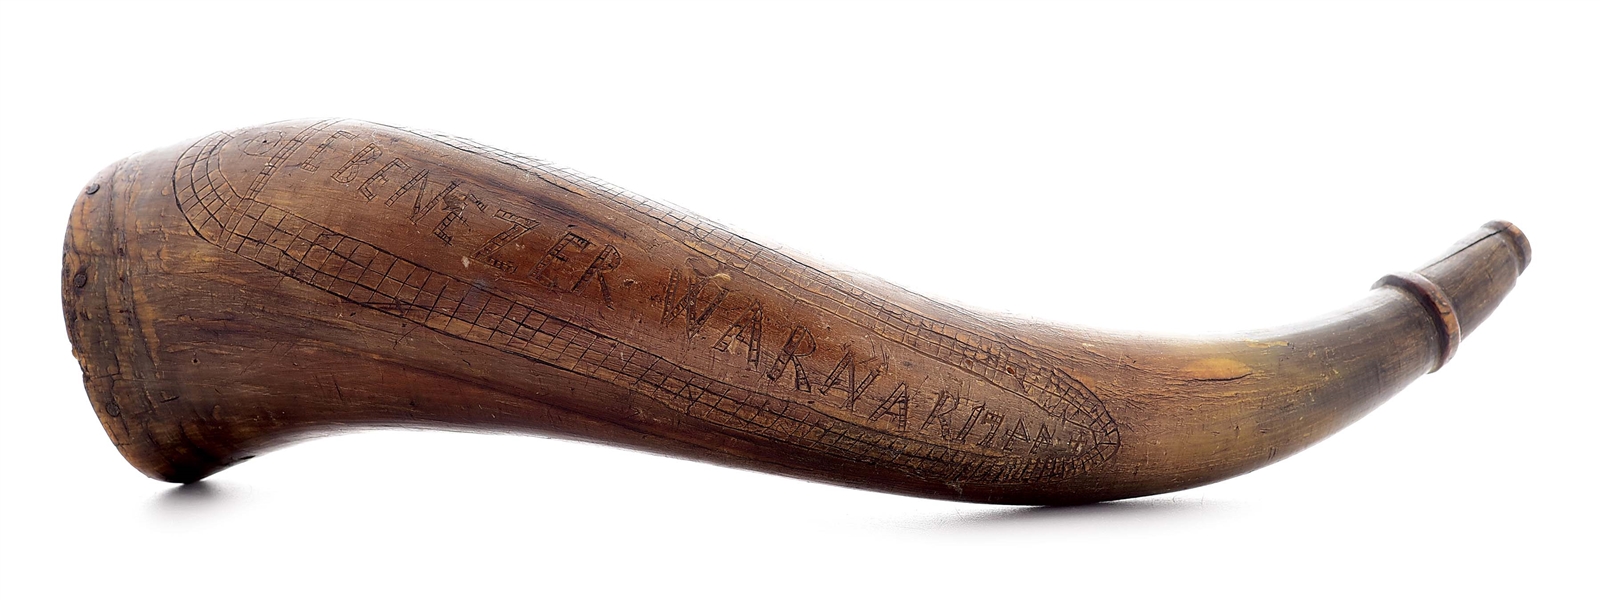 PRE-FRENCH AND INDIAN WAR POWDER HORN OF DR. EBENEZAR WARNER DATED 1744